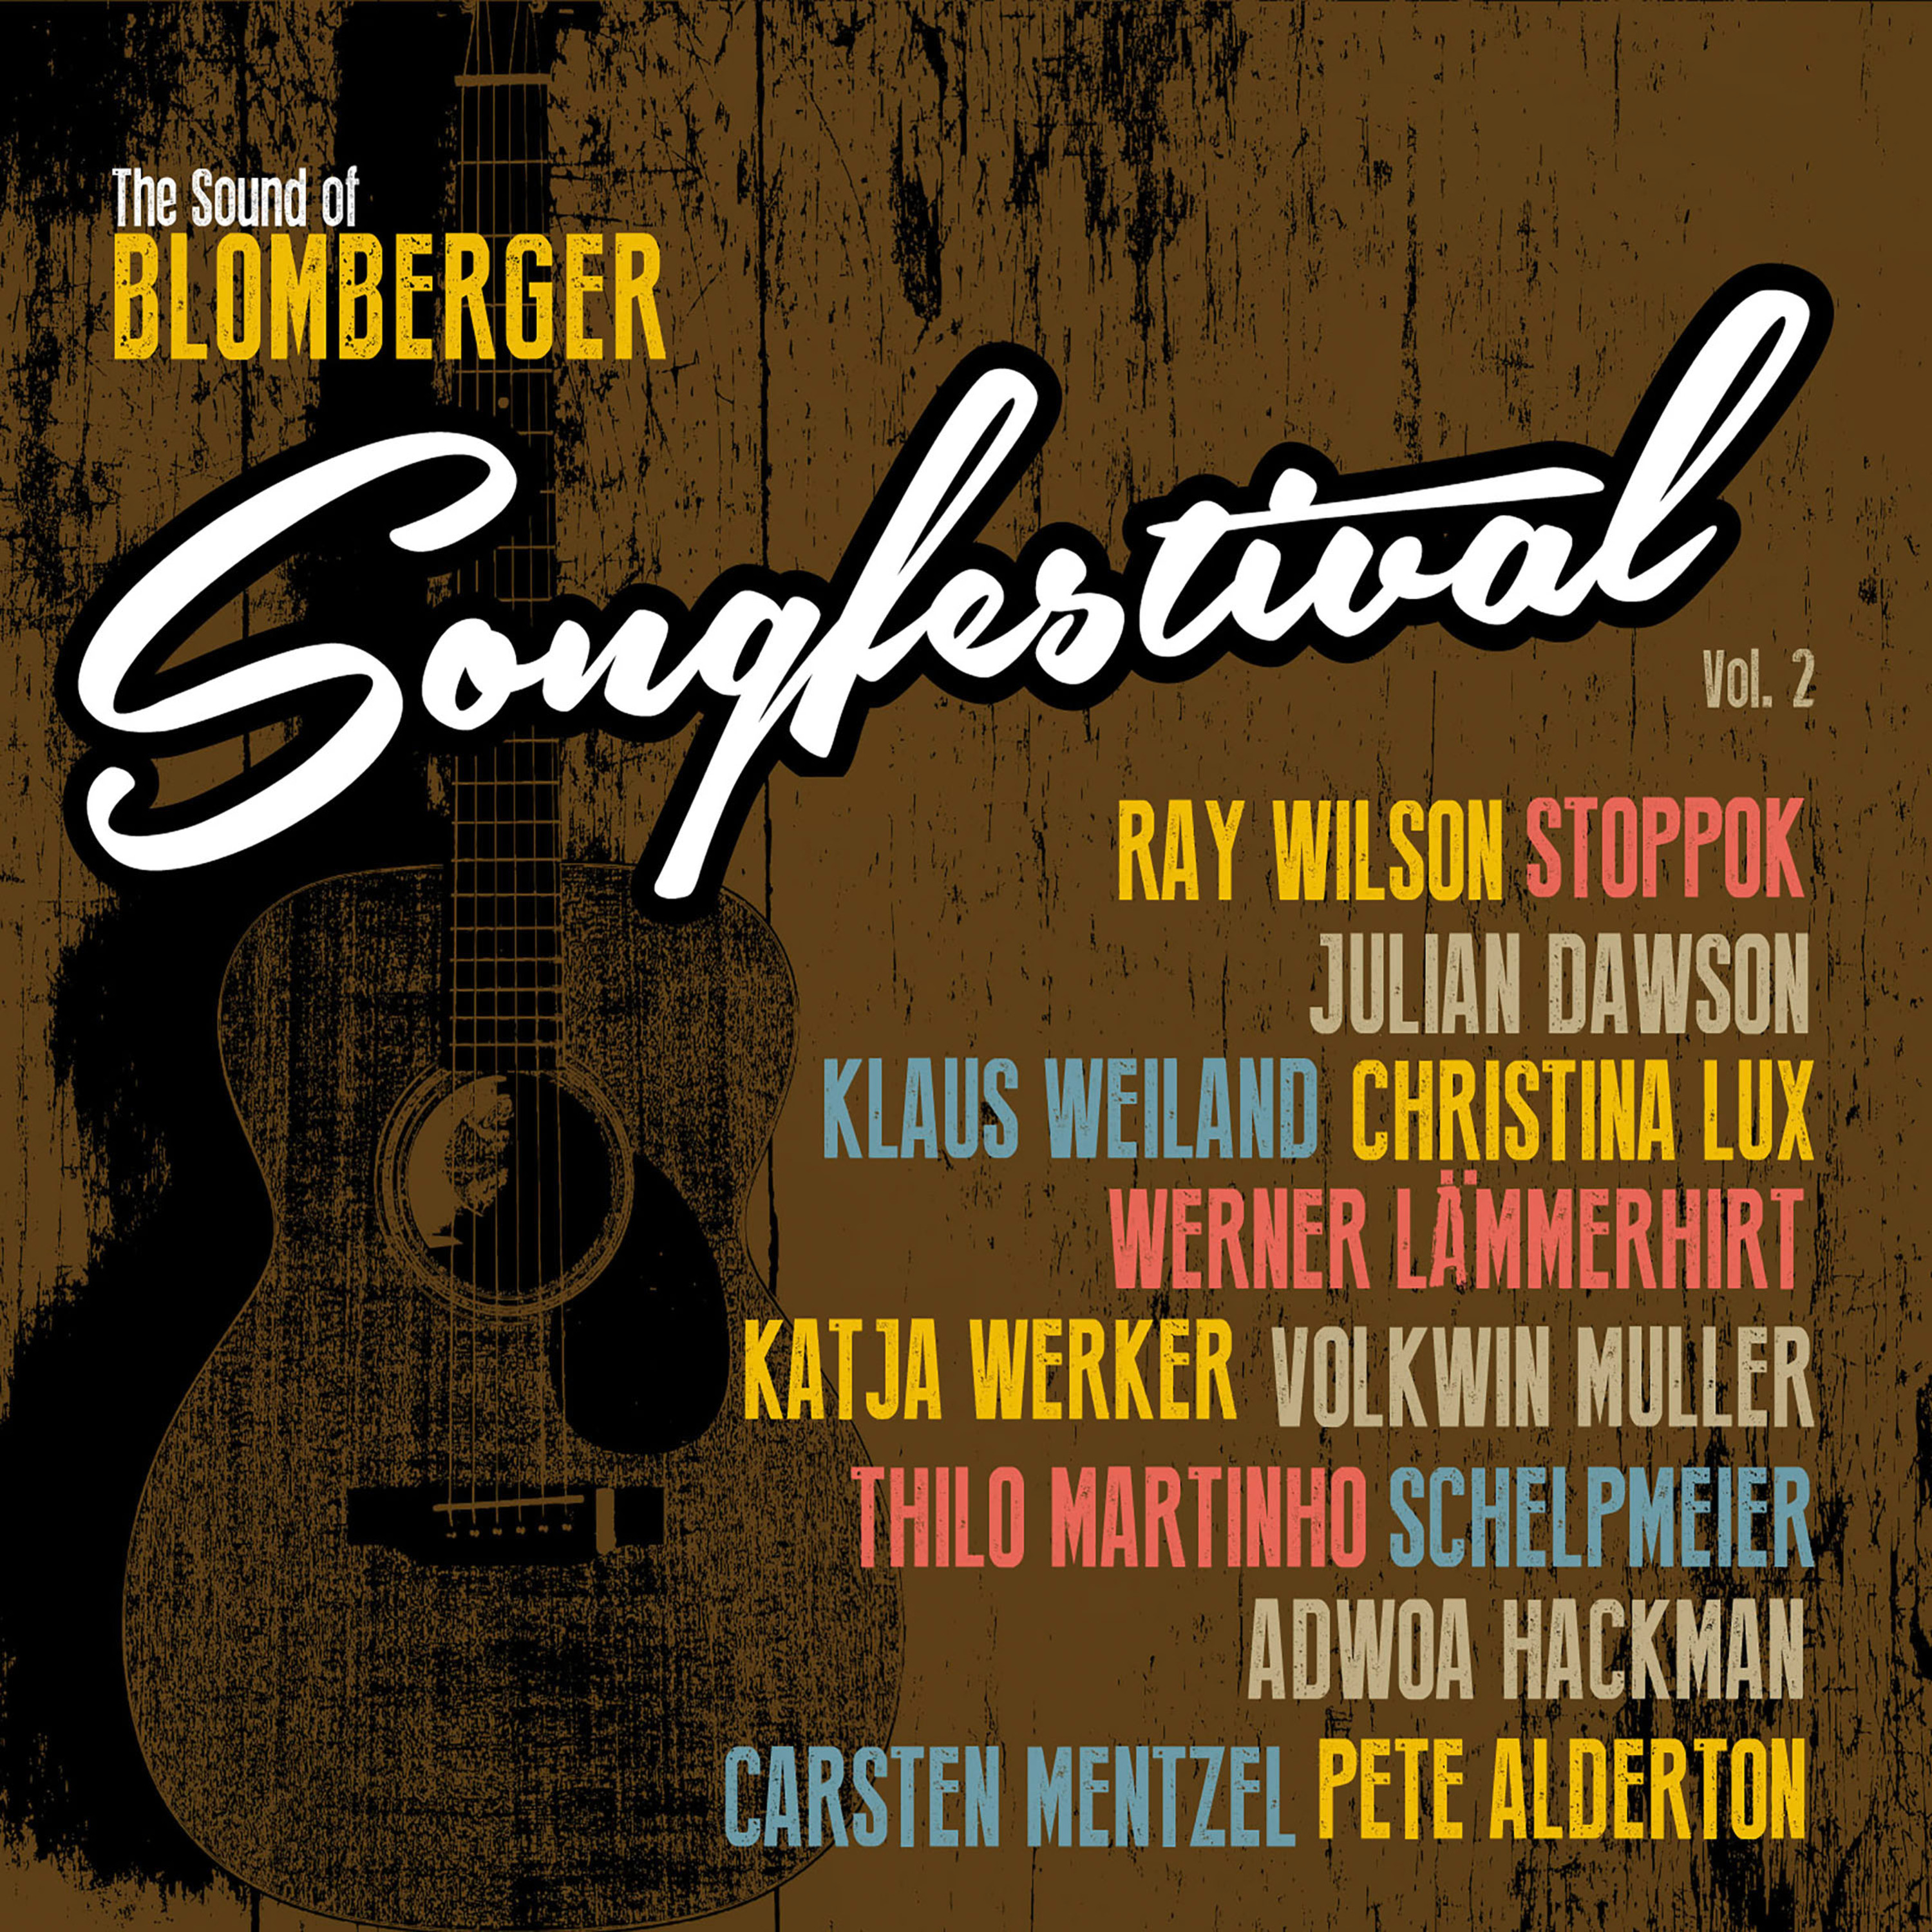 The Sound of Blomberger Songfestival, Vol. 2 (Live)